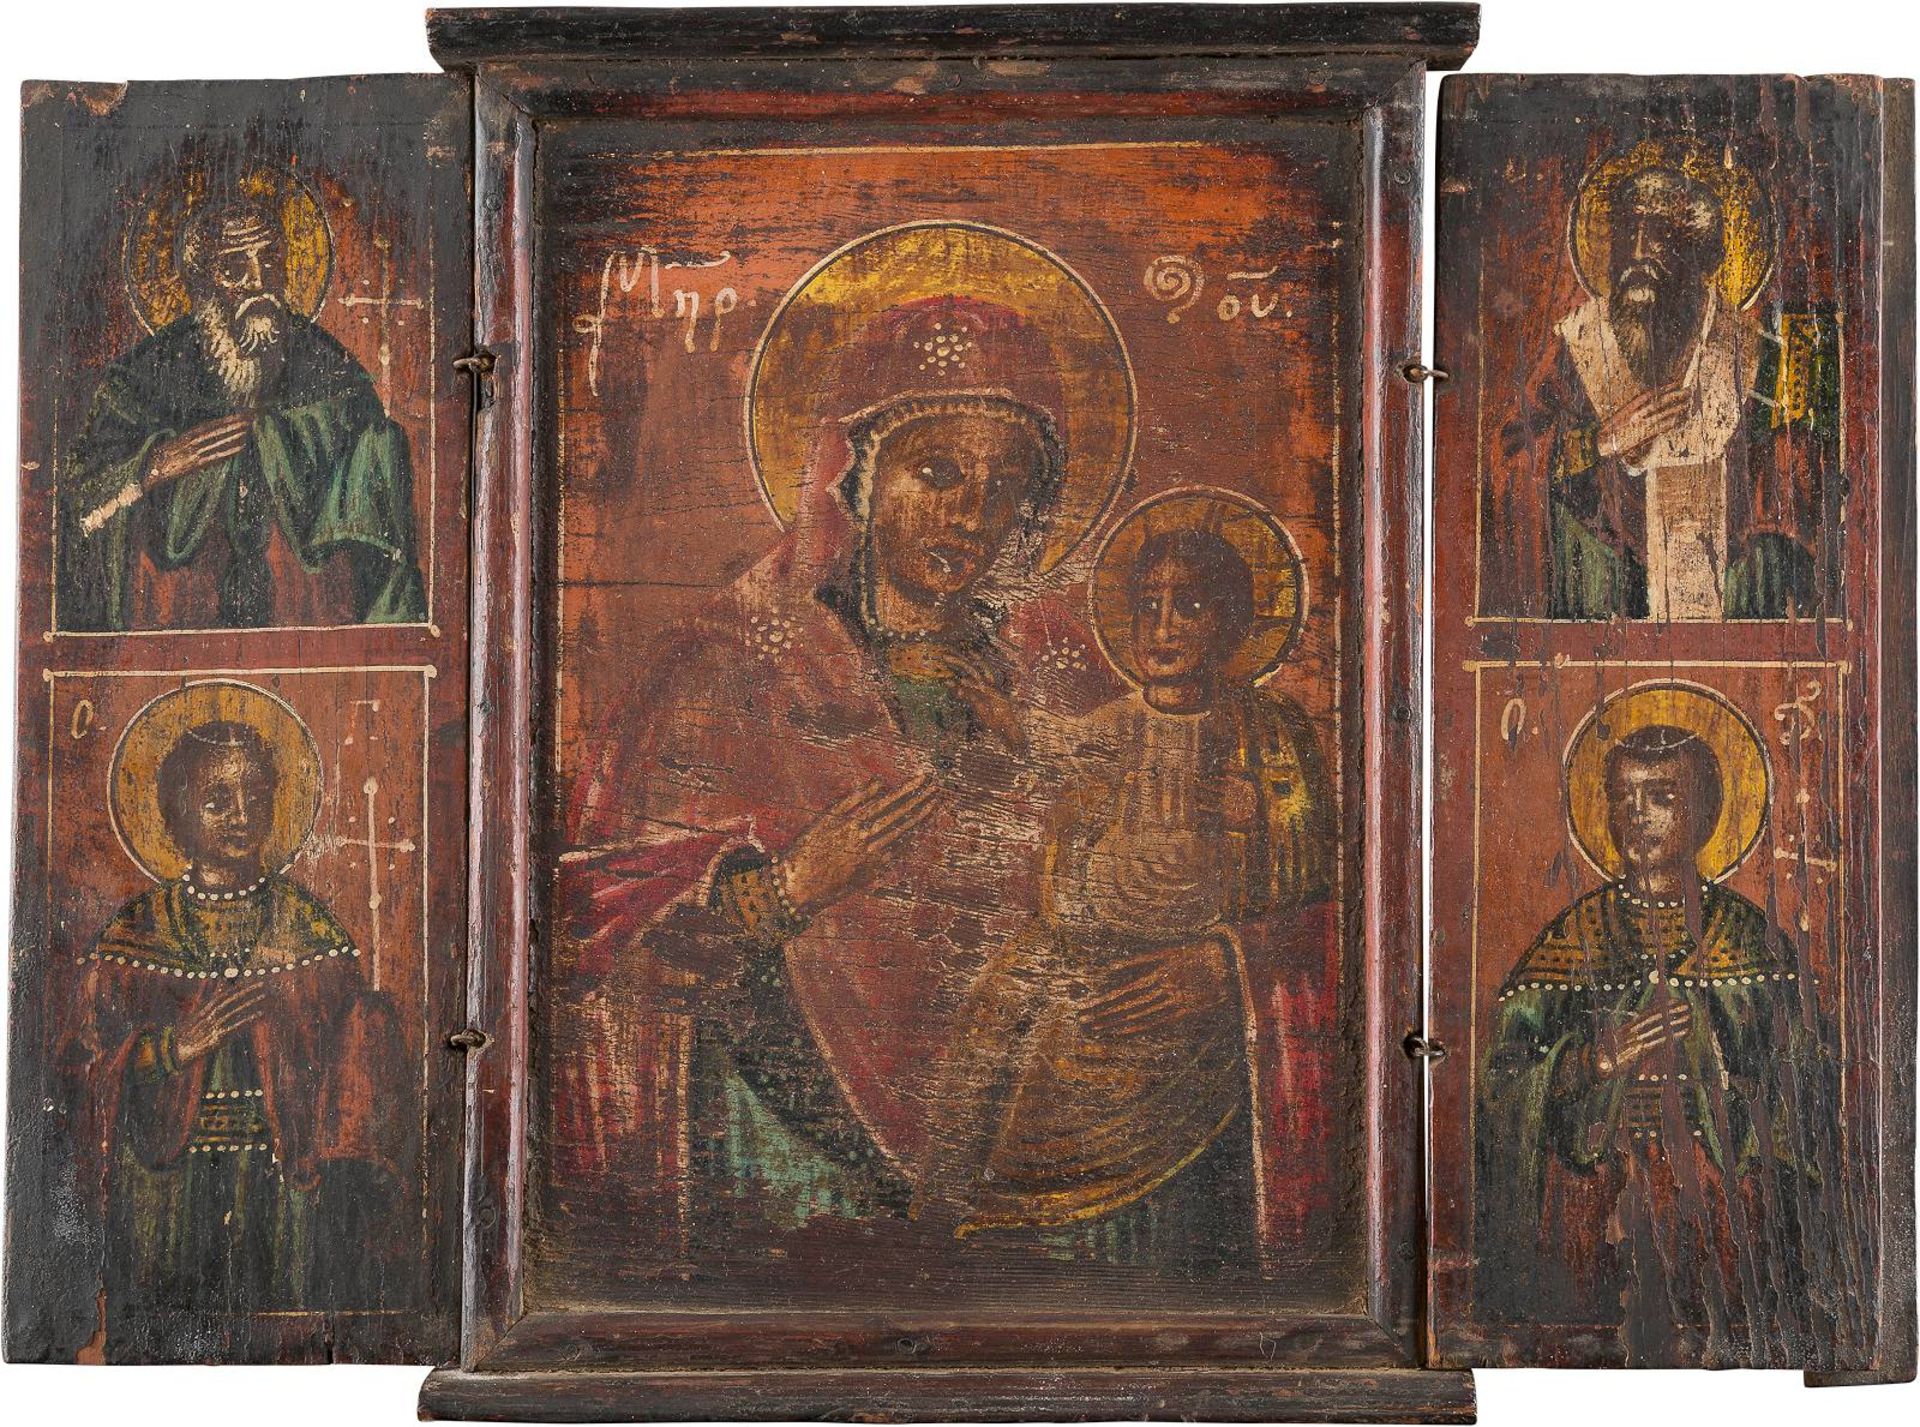 A TRIPTYCH SHOWING THE MOTHER OF GOD AND FOUR SAINTSBalkan, 19th century Oil on wood panel.